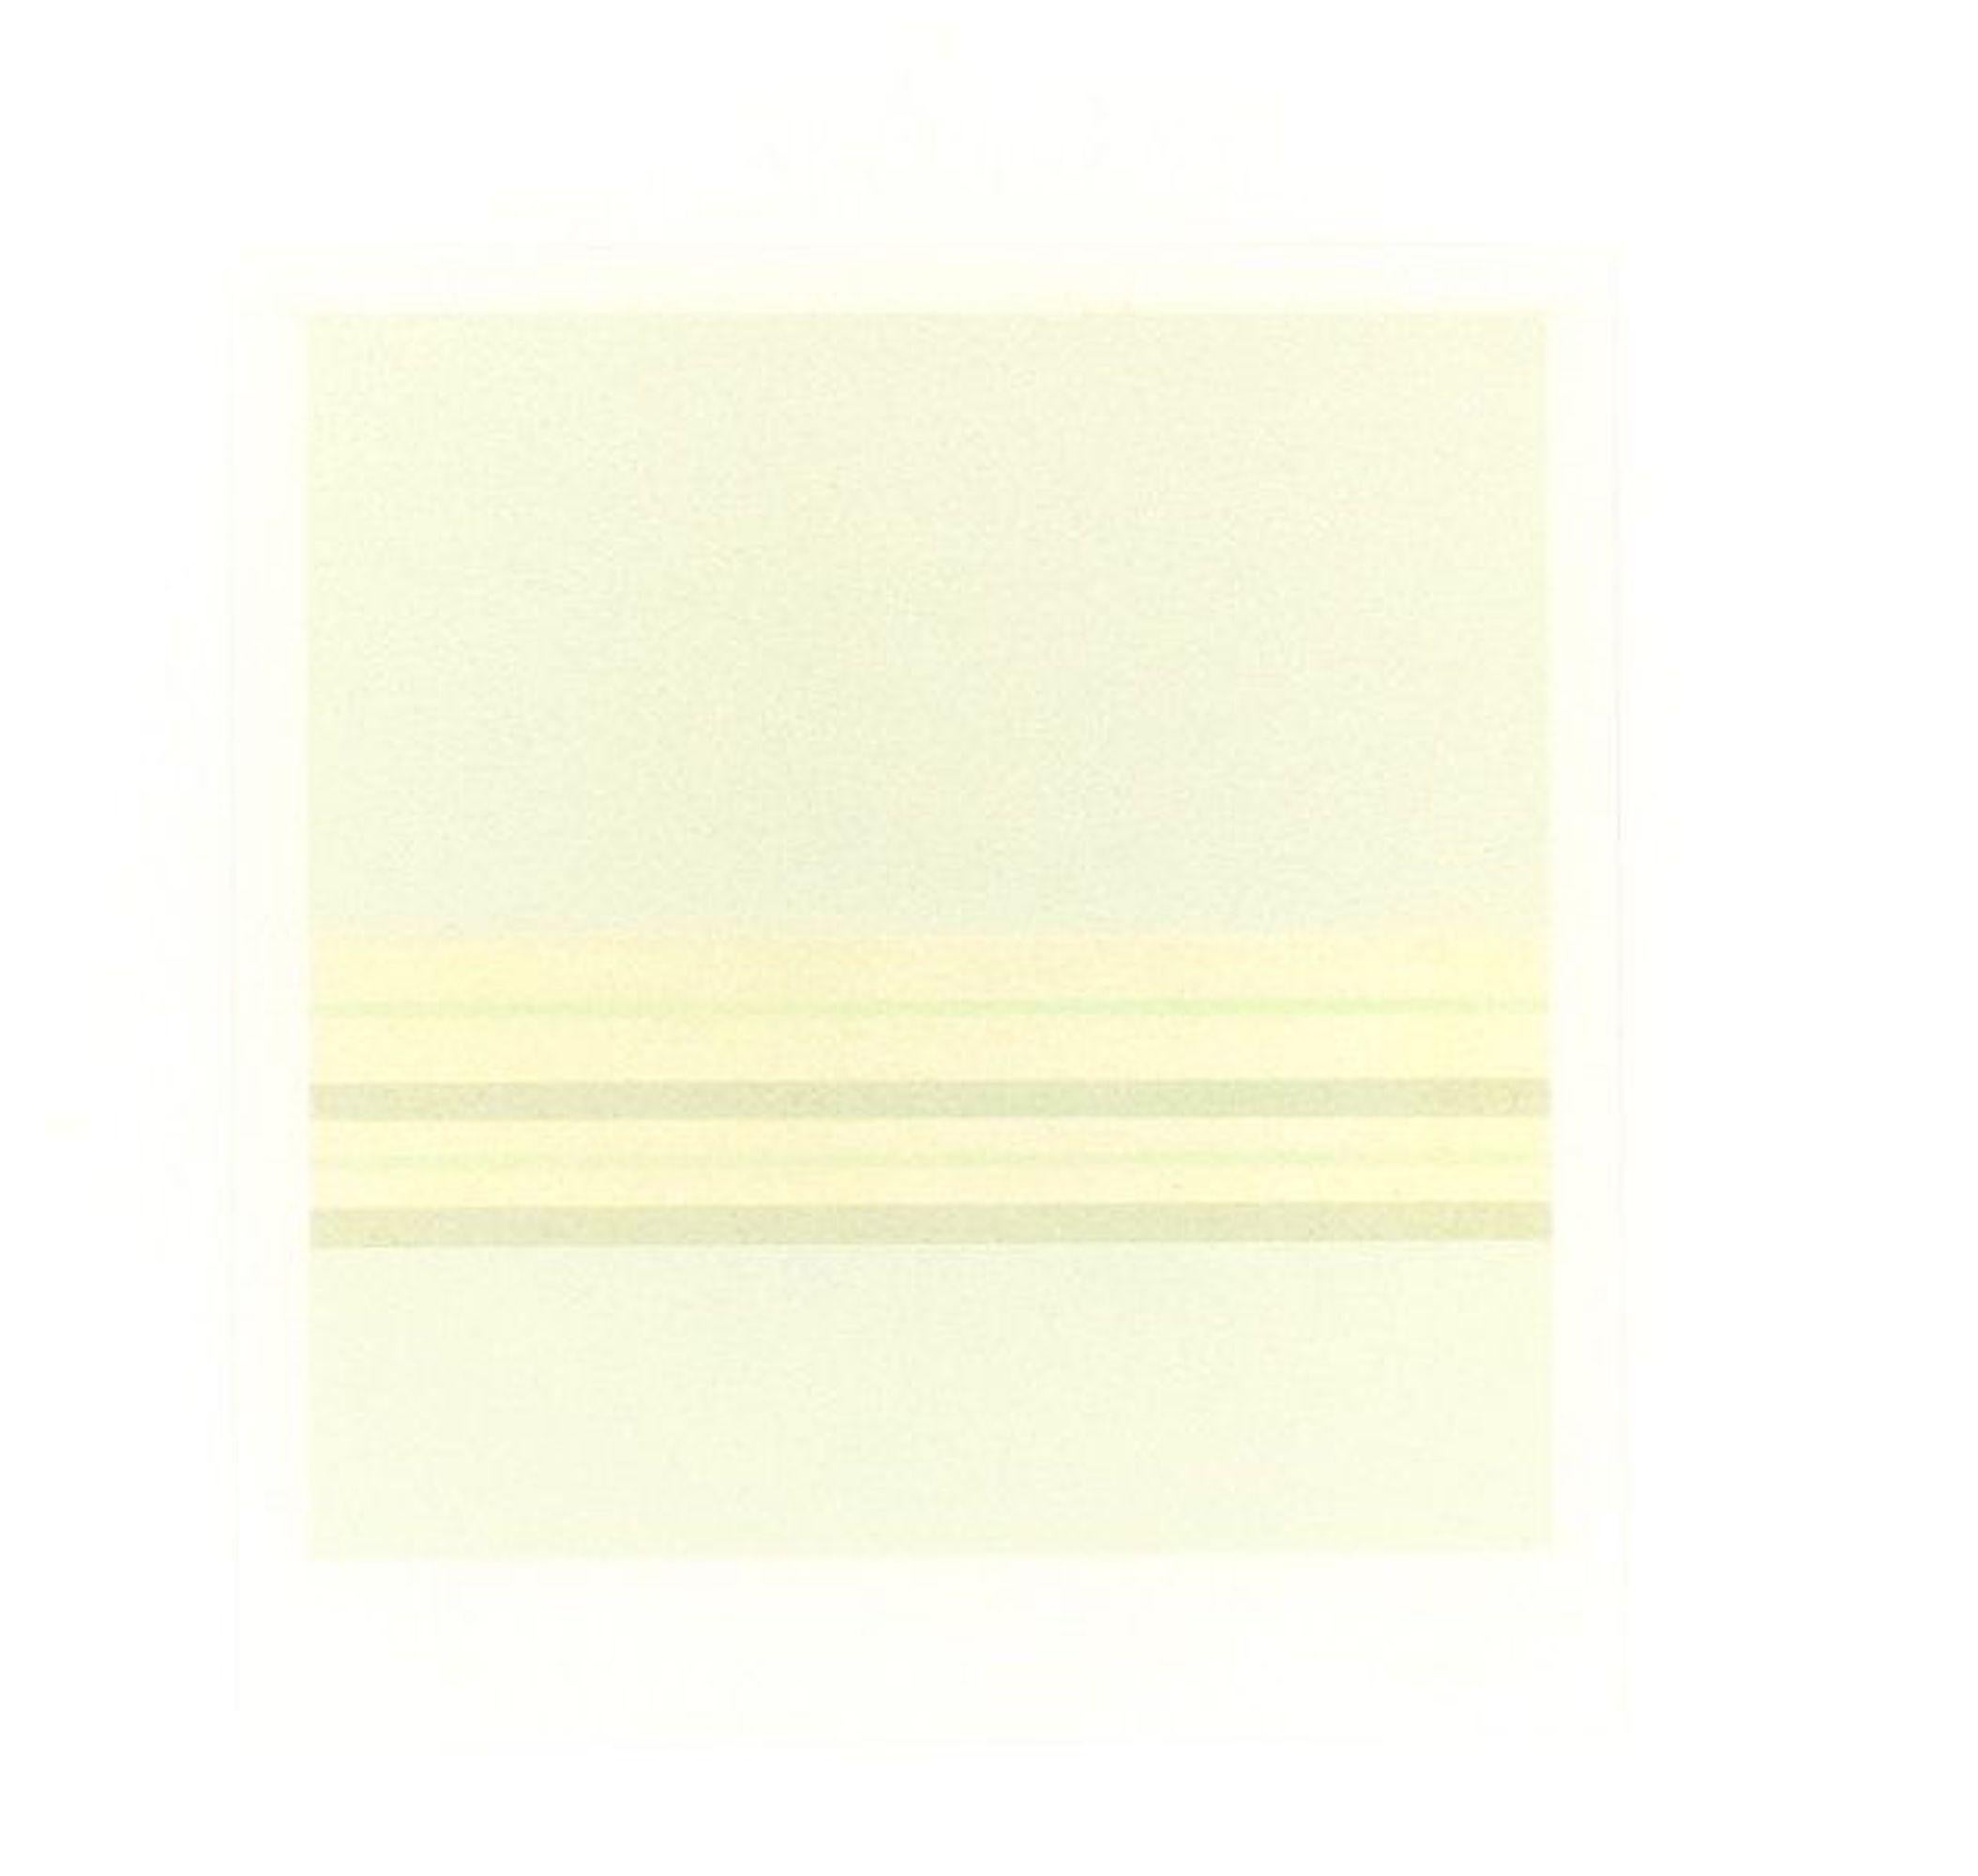 Image dimensions: 18 x 18 cm.

Green stripes is an original colored serigraph on paper, realized by the Italian artist Antonio Calderara  (1903-1978) and published in 1978 by La Nuova Foglio, a publishing house of Macerata, Italy. 

The original